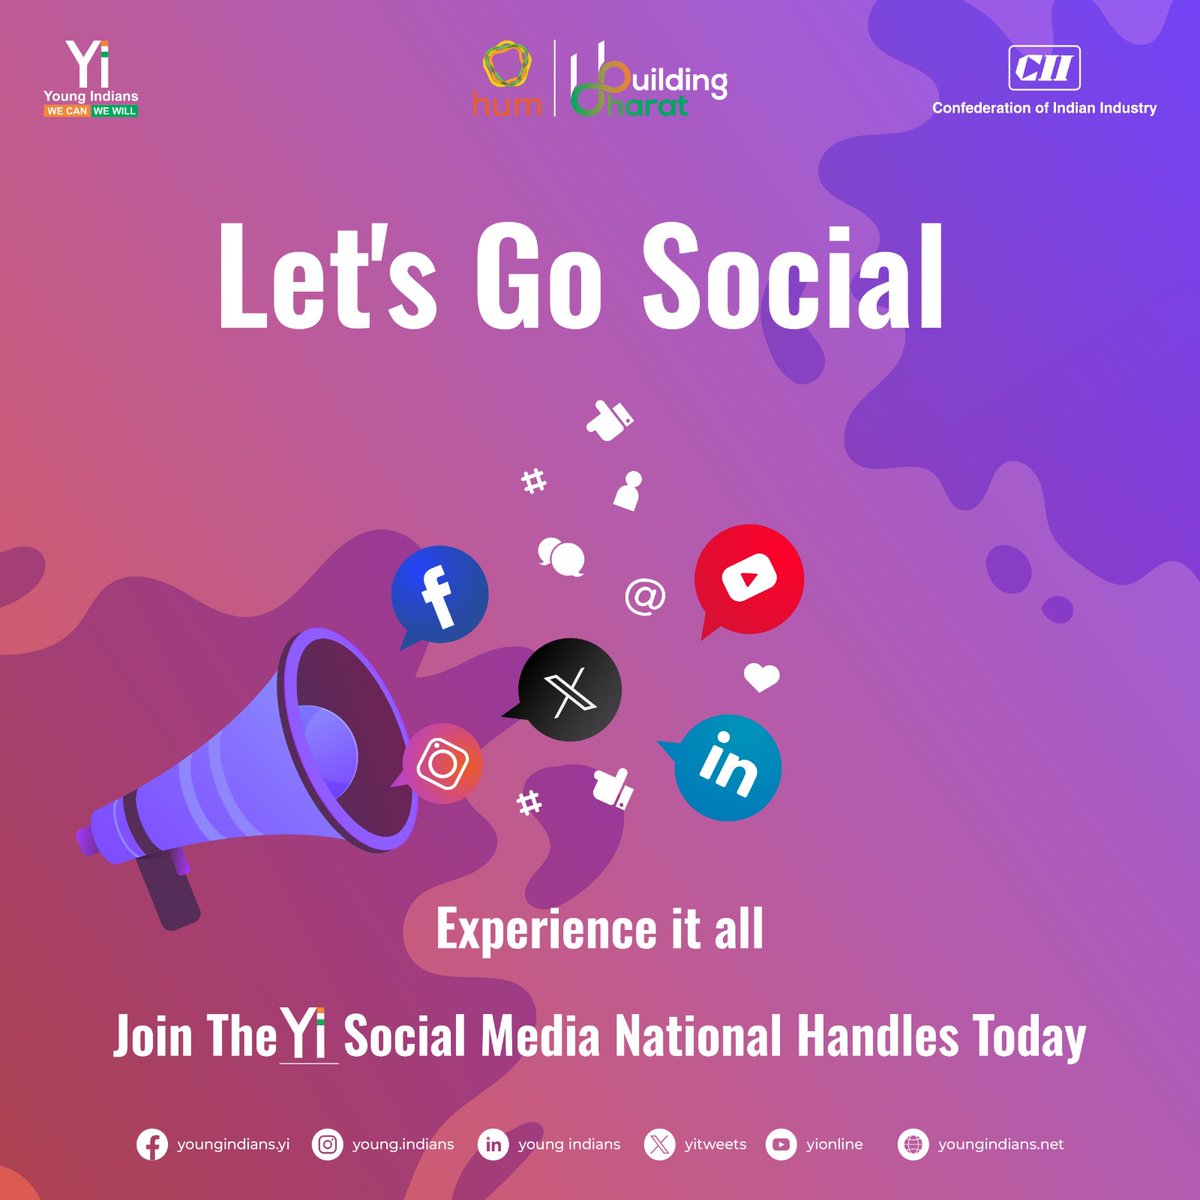 Let's elevate our efforts to collaboratively contribute to #BuildingBharat through Yi national handles on Instagram, Facebook, Twitter and LinkedIn.

#Yi #Cii #YoungIndians #YiNational #newLeadership #NationBuilding #ThoughtLeadership #YouthLeadership #ToGetherWeAreOne #HUM